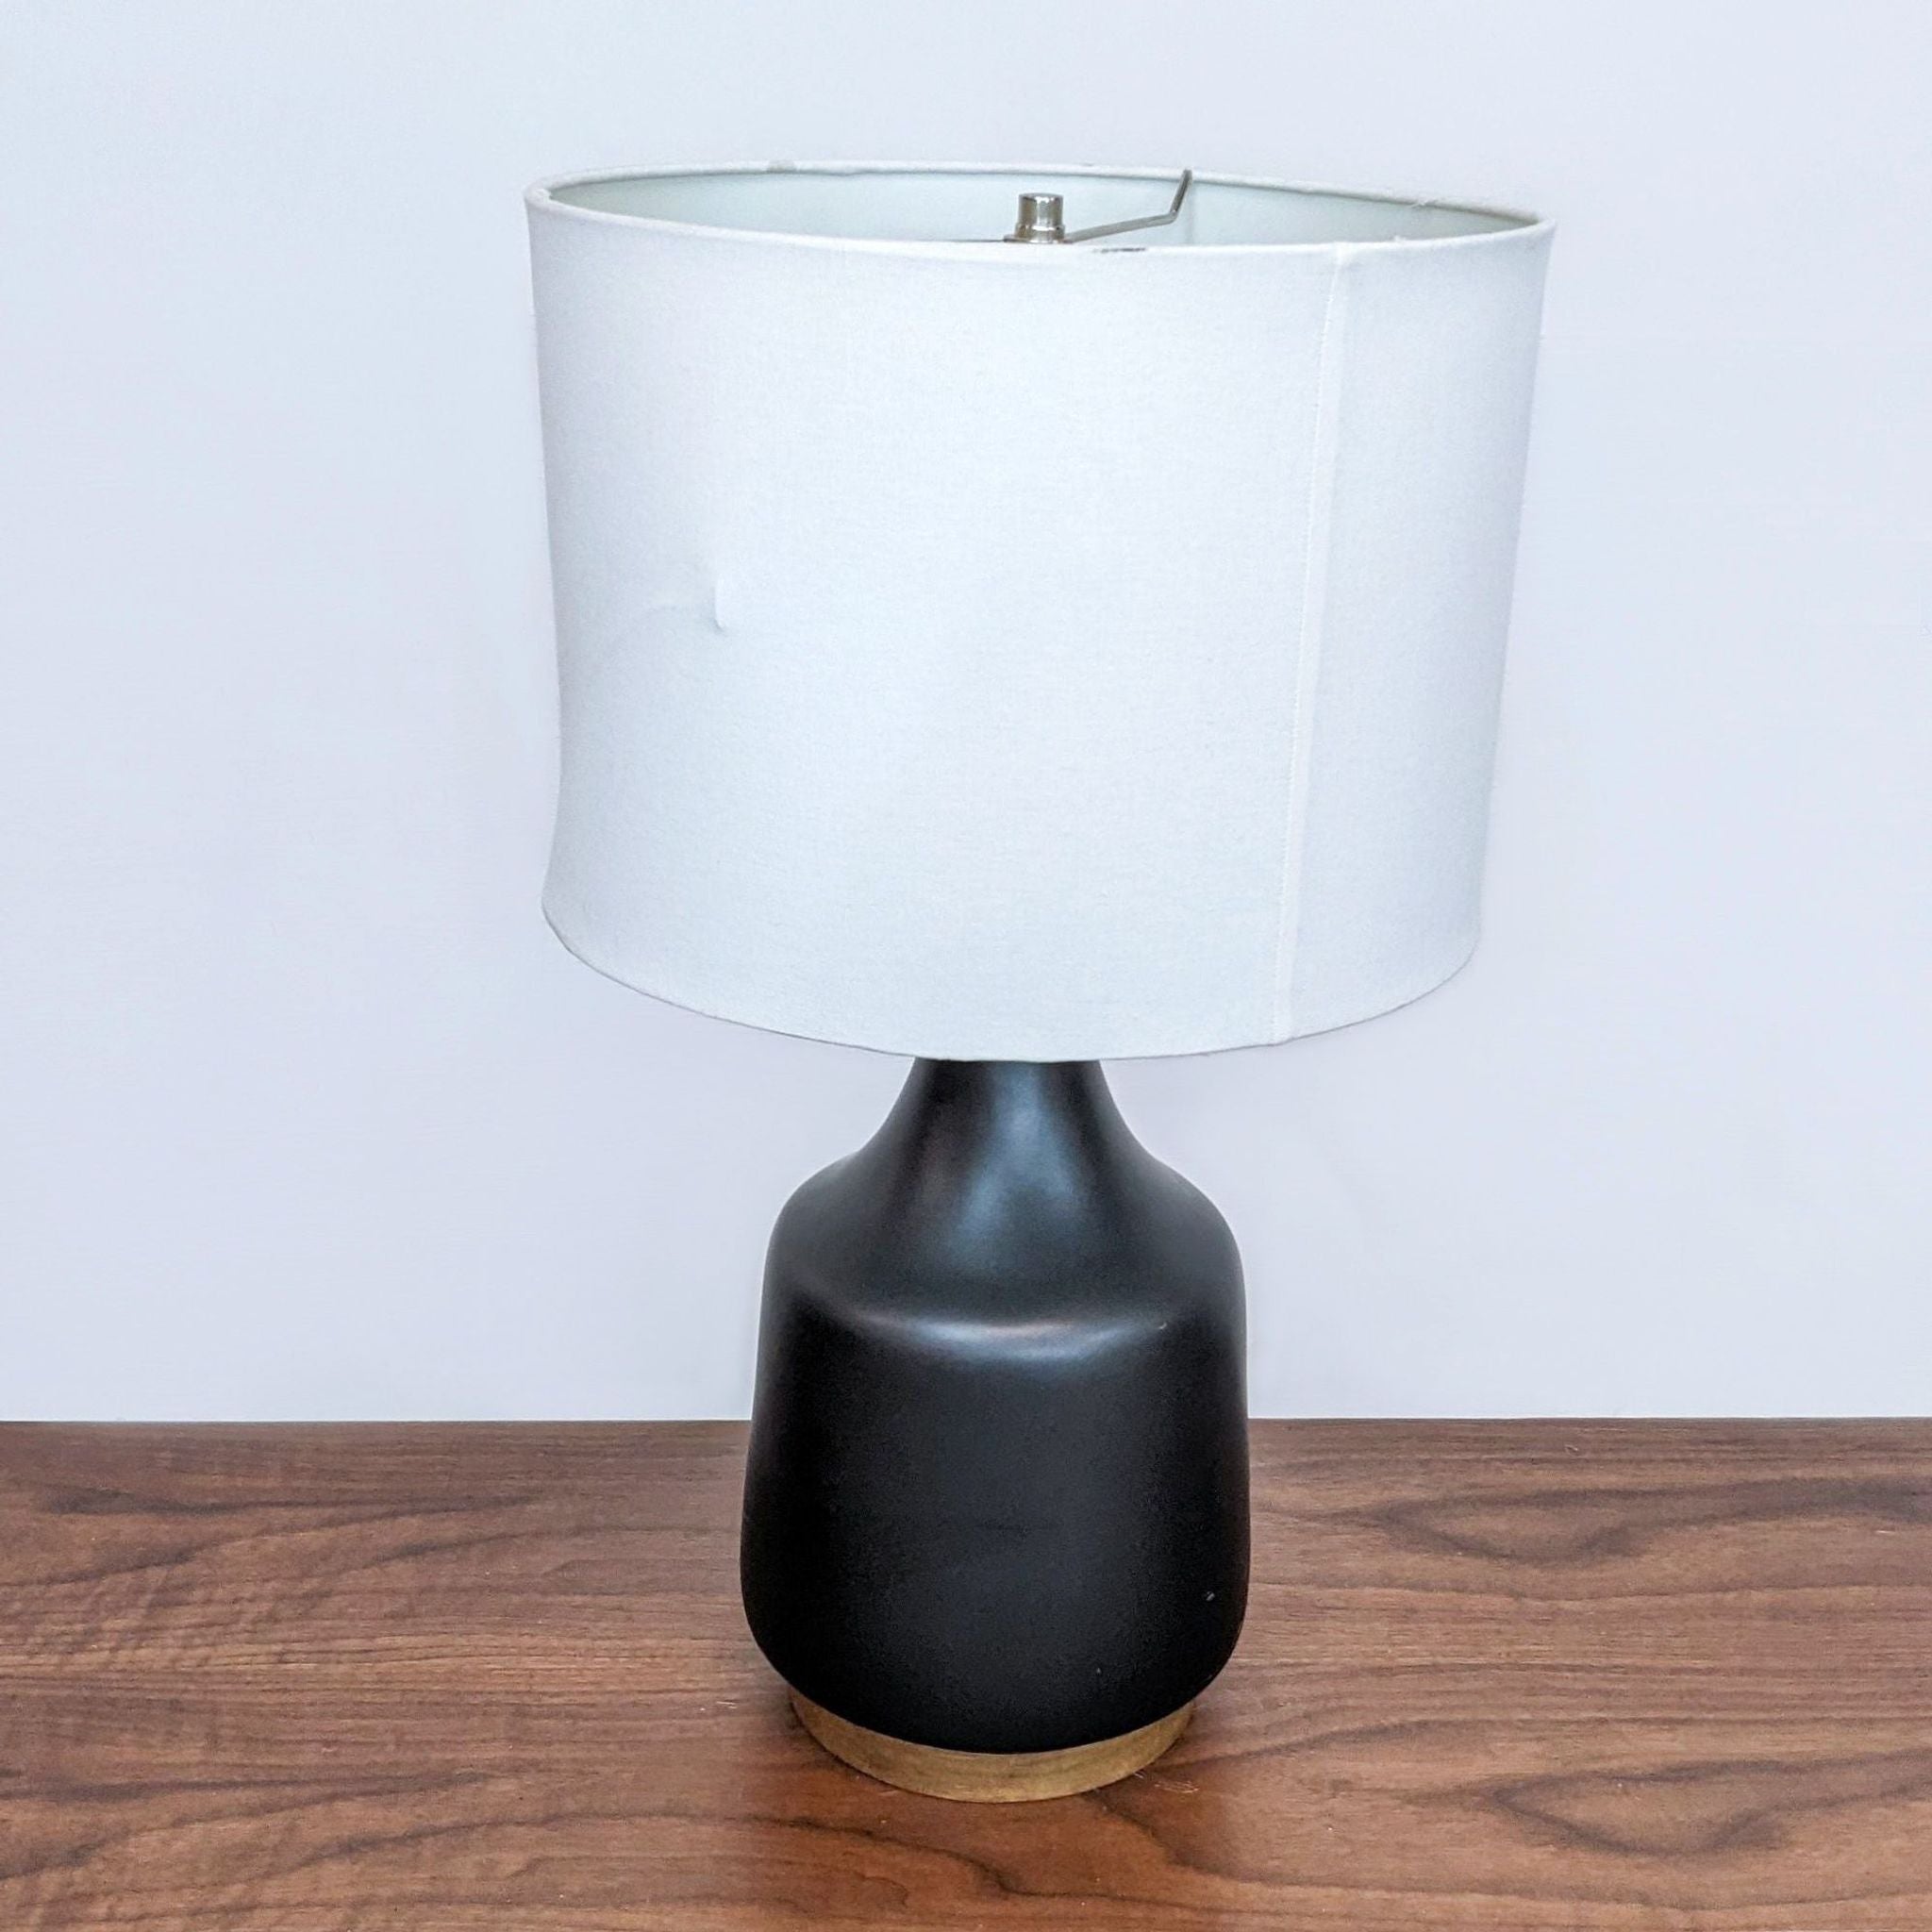 West Elm table lamp with a white shade and black base on a wooden surface.